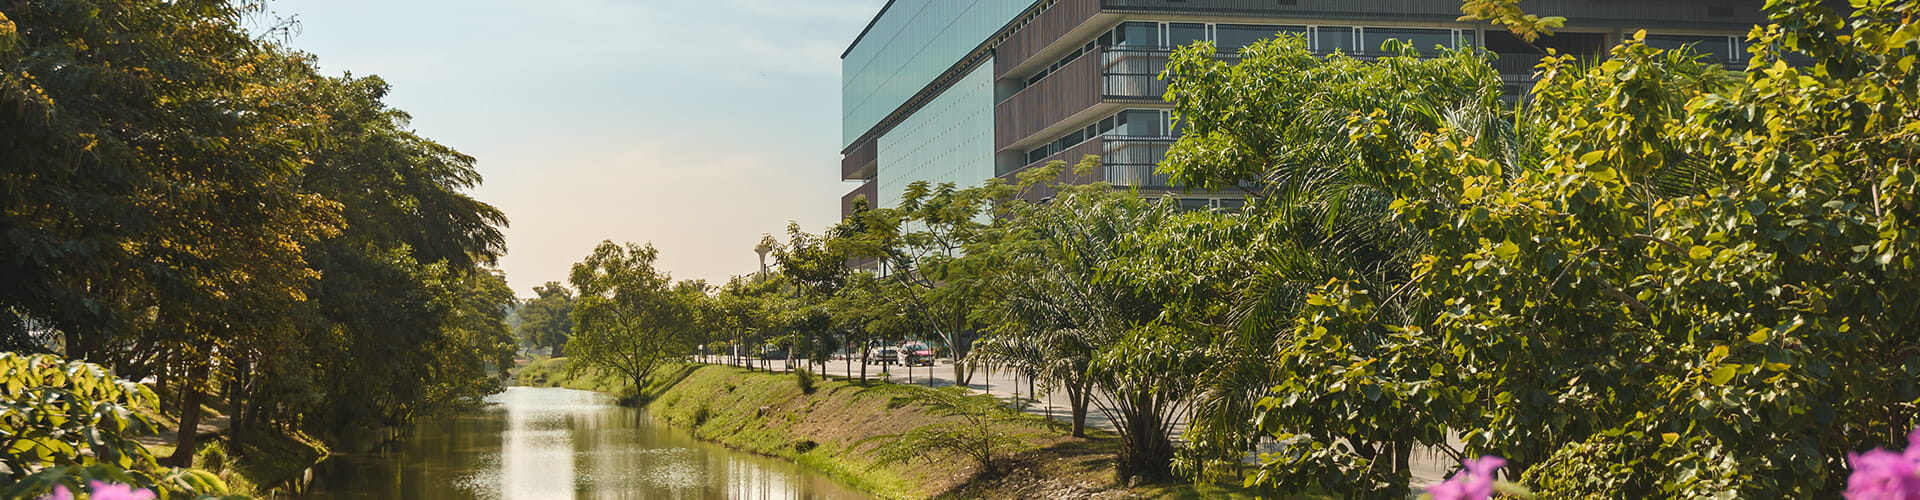 Modern building beside a calm canal lined with lush greenery under a clear sky.